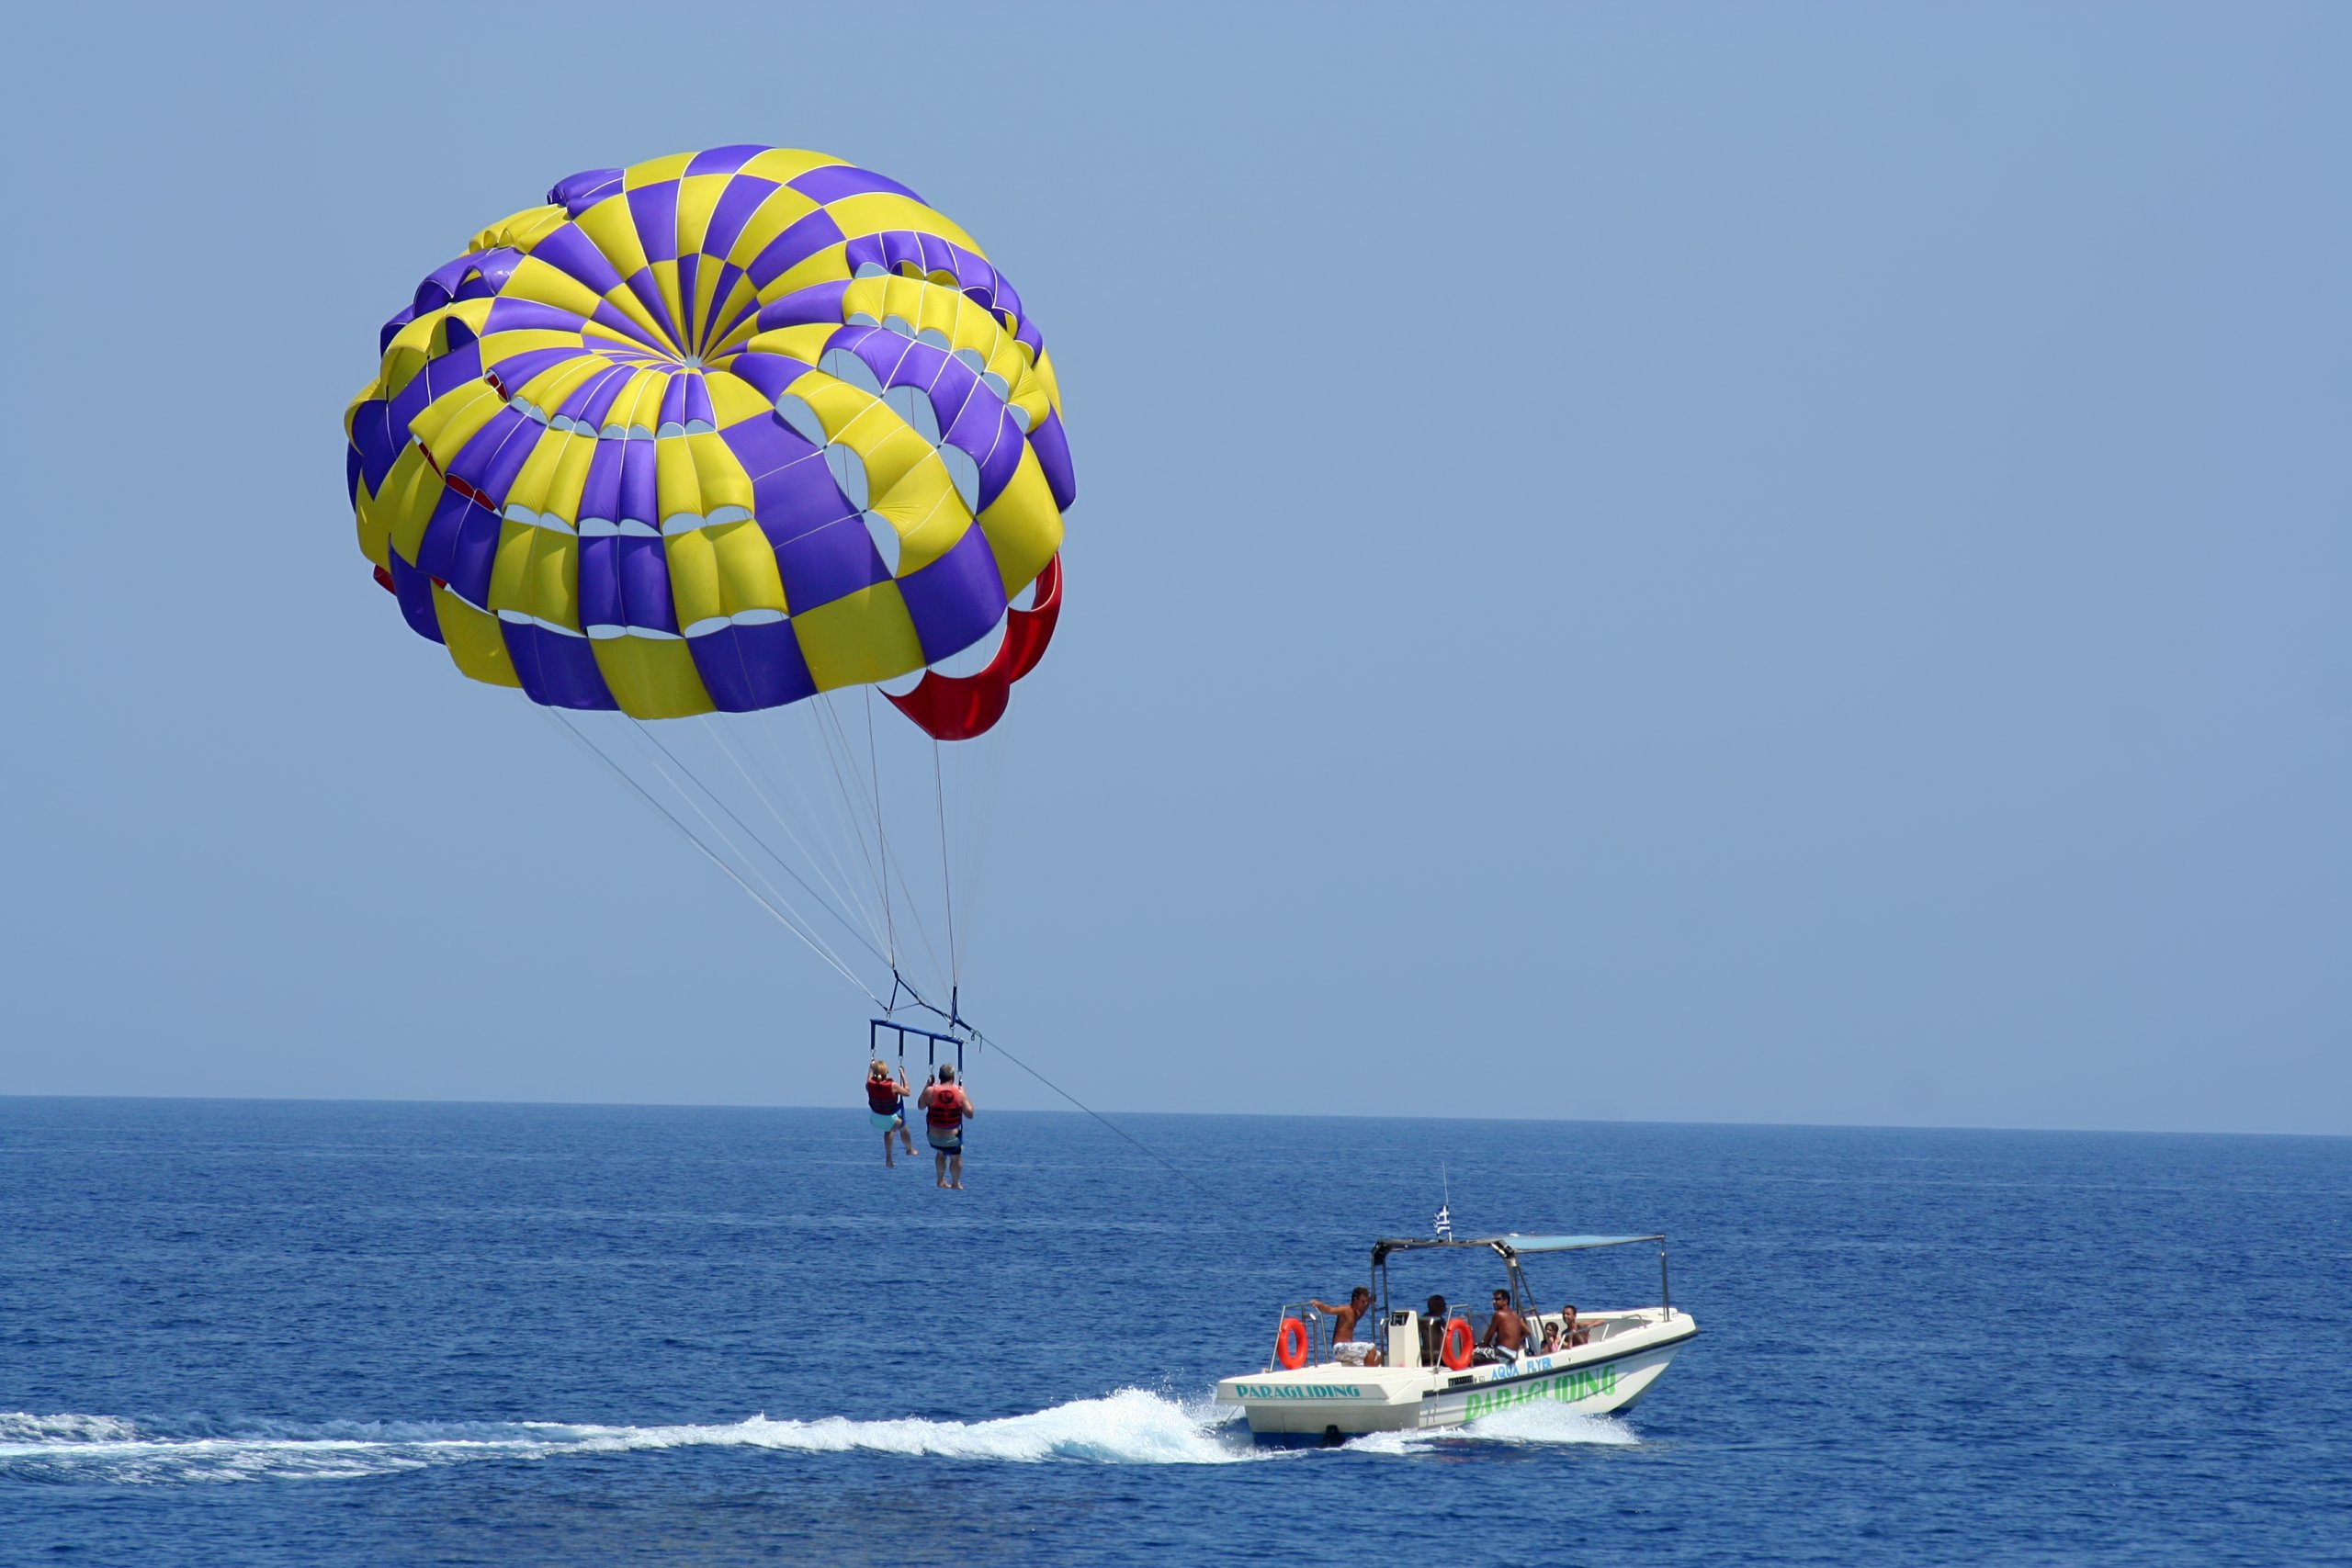 Flo Jo’s Watersports in Malta, Europe | Parasailing,Jet Skiing - Rated 0.8